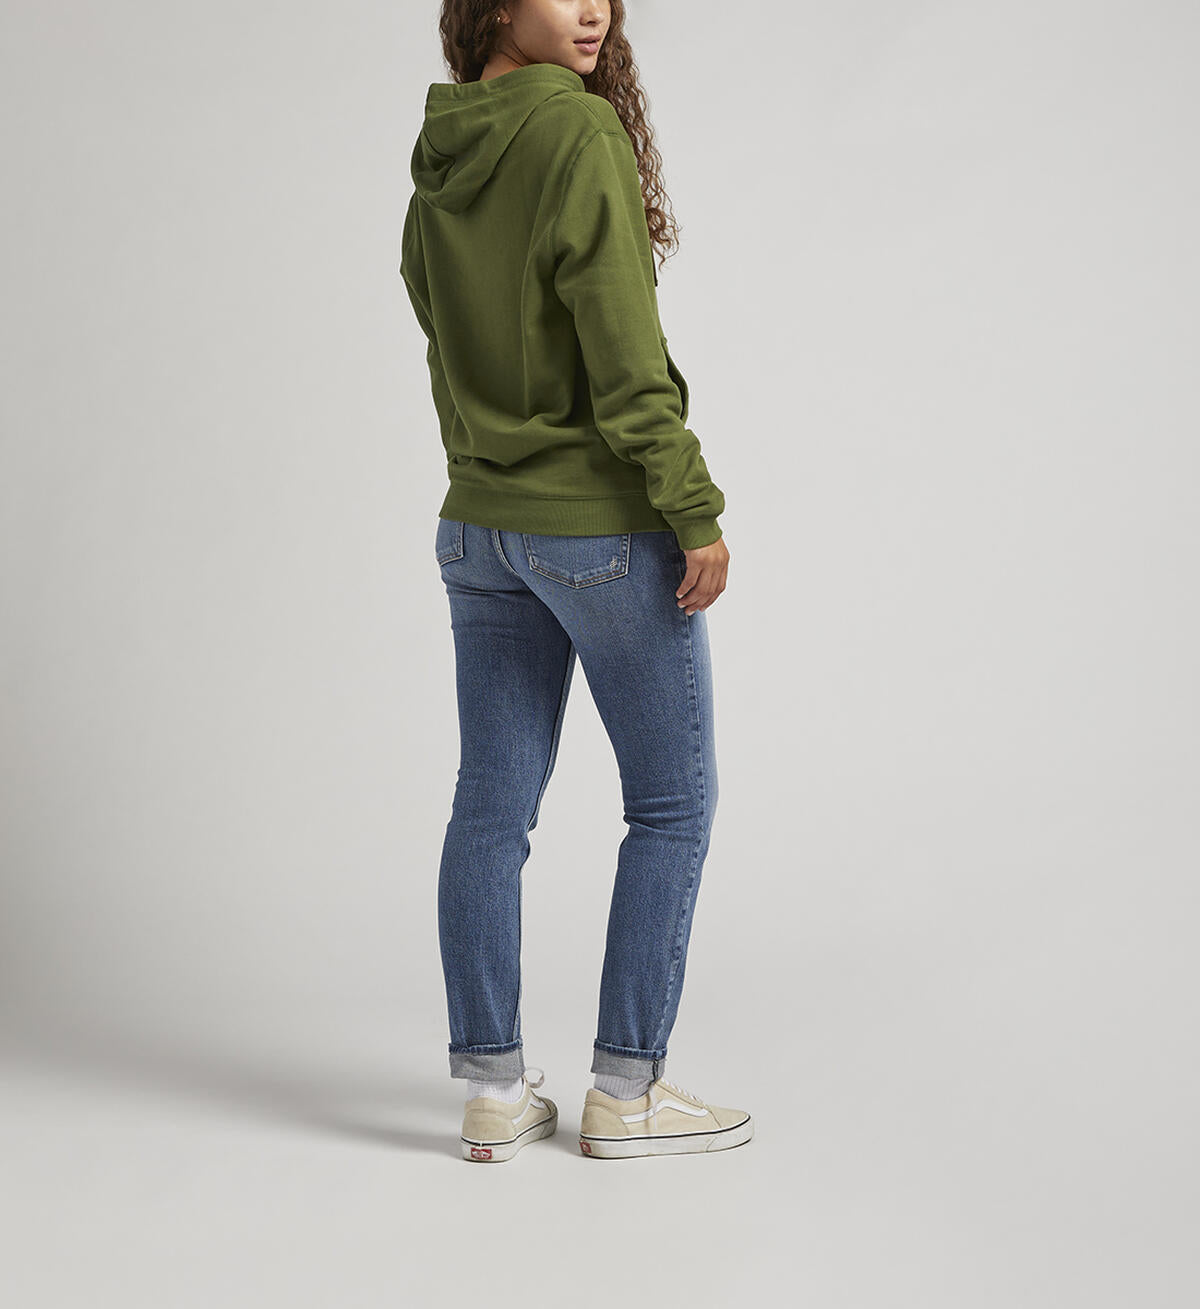 SILVER JEANS-Unisex Logo Hoodie-OLIVE